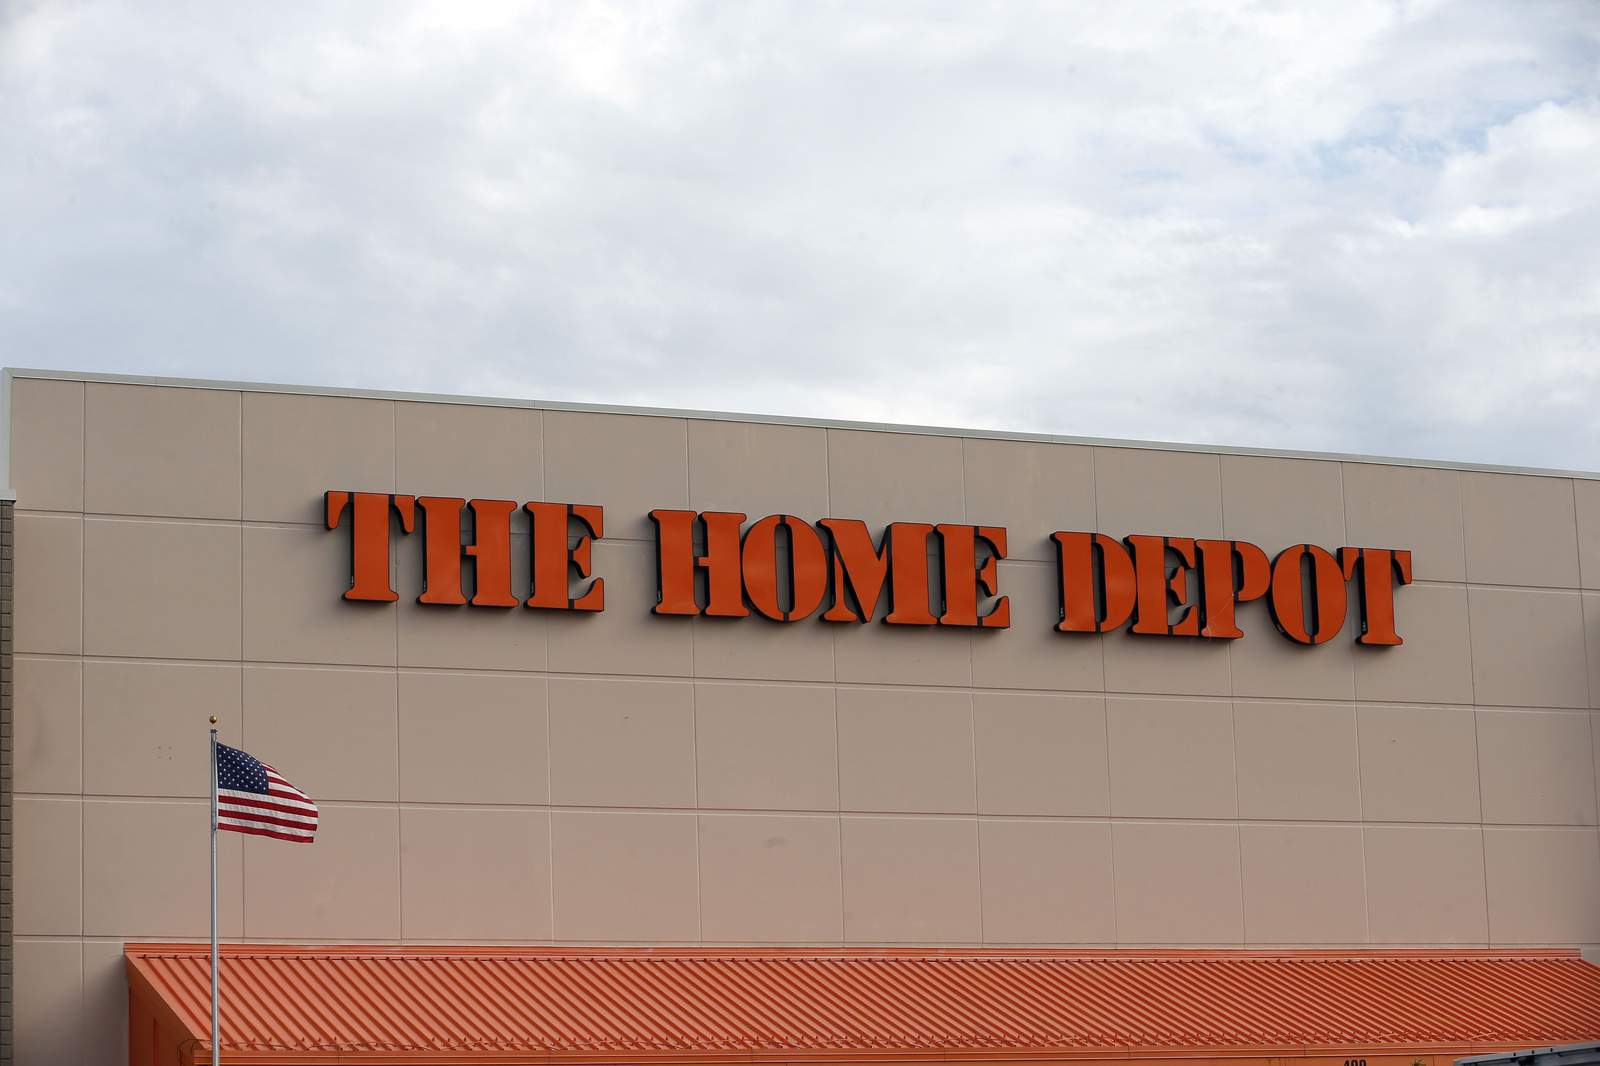 Home Depot recalls more than 190,000 ceiling fans after blades fly off